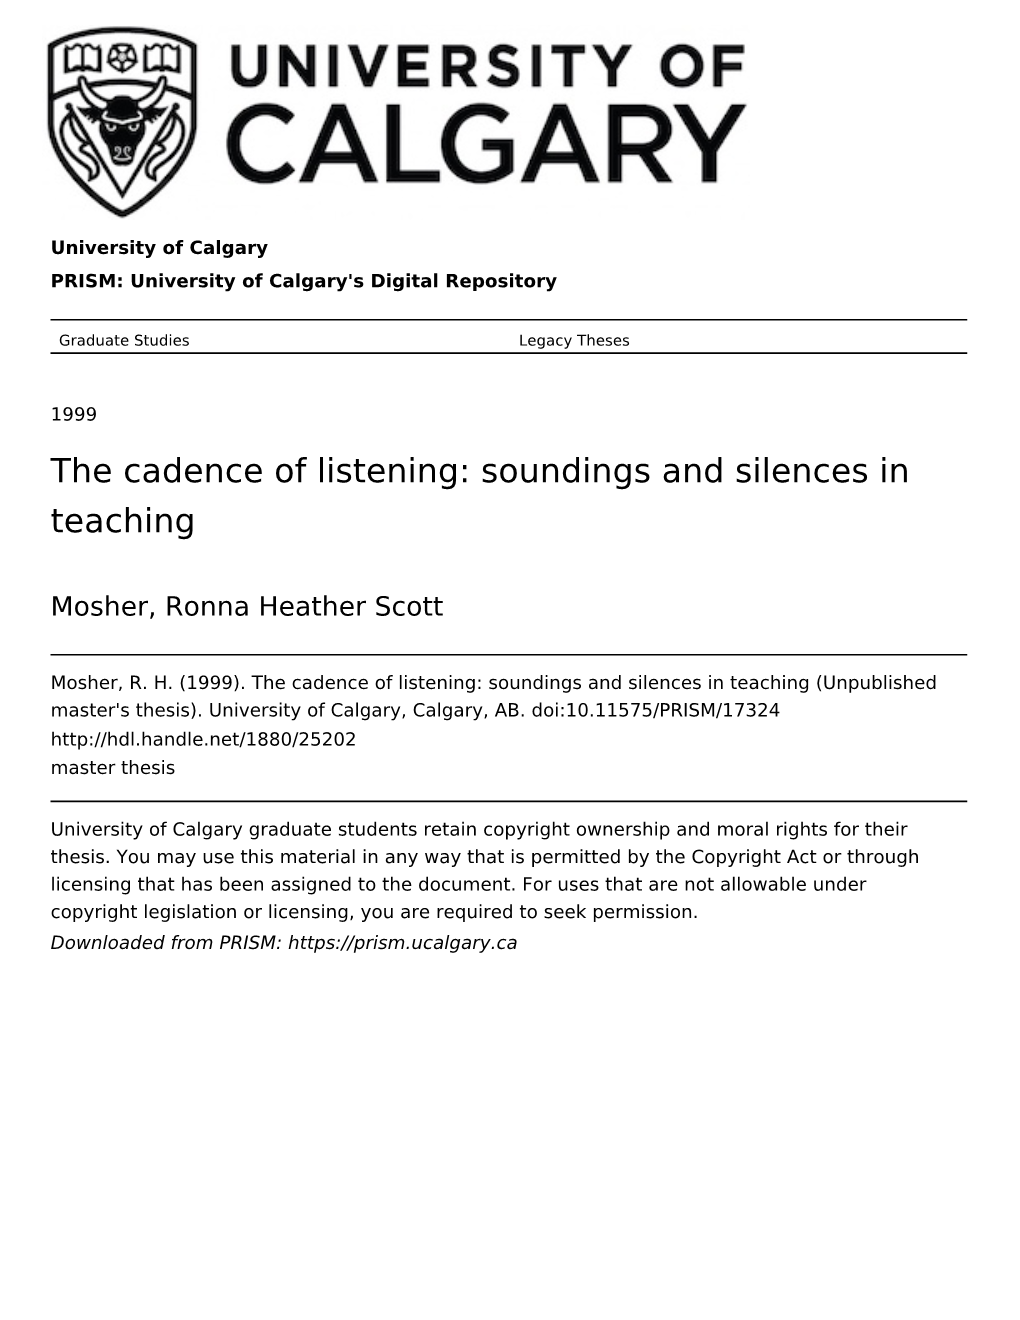 The Cadence of Listening: Soundings and Silences in Teaching